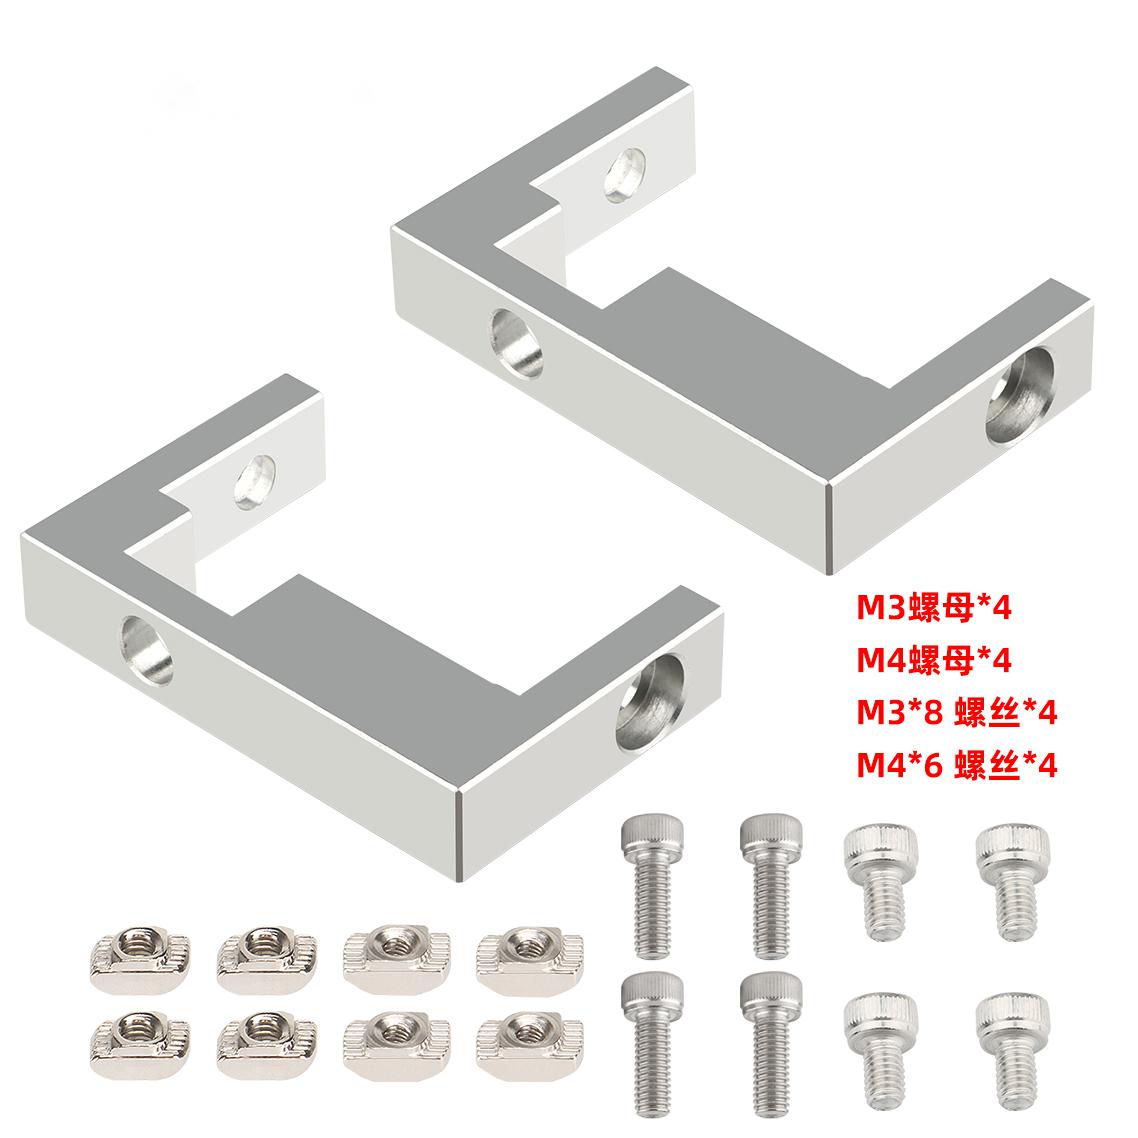 20202040-Aluminum-Profile-mount-MGN12-Linear-Guide-Fixing-Block-with-Screws-for-3D-Printer-Part-1864368-5